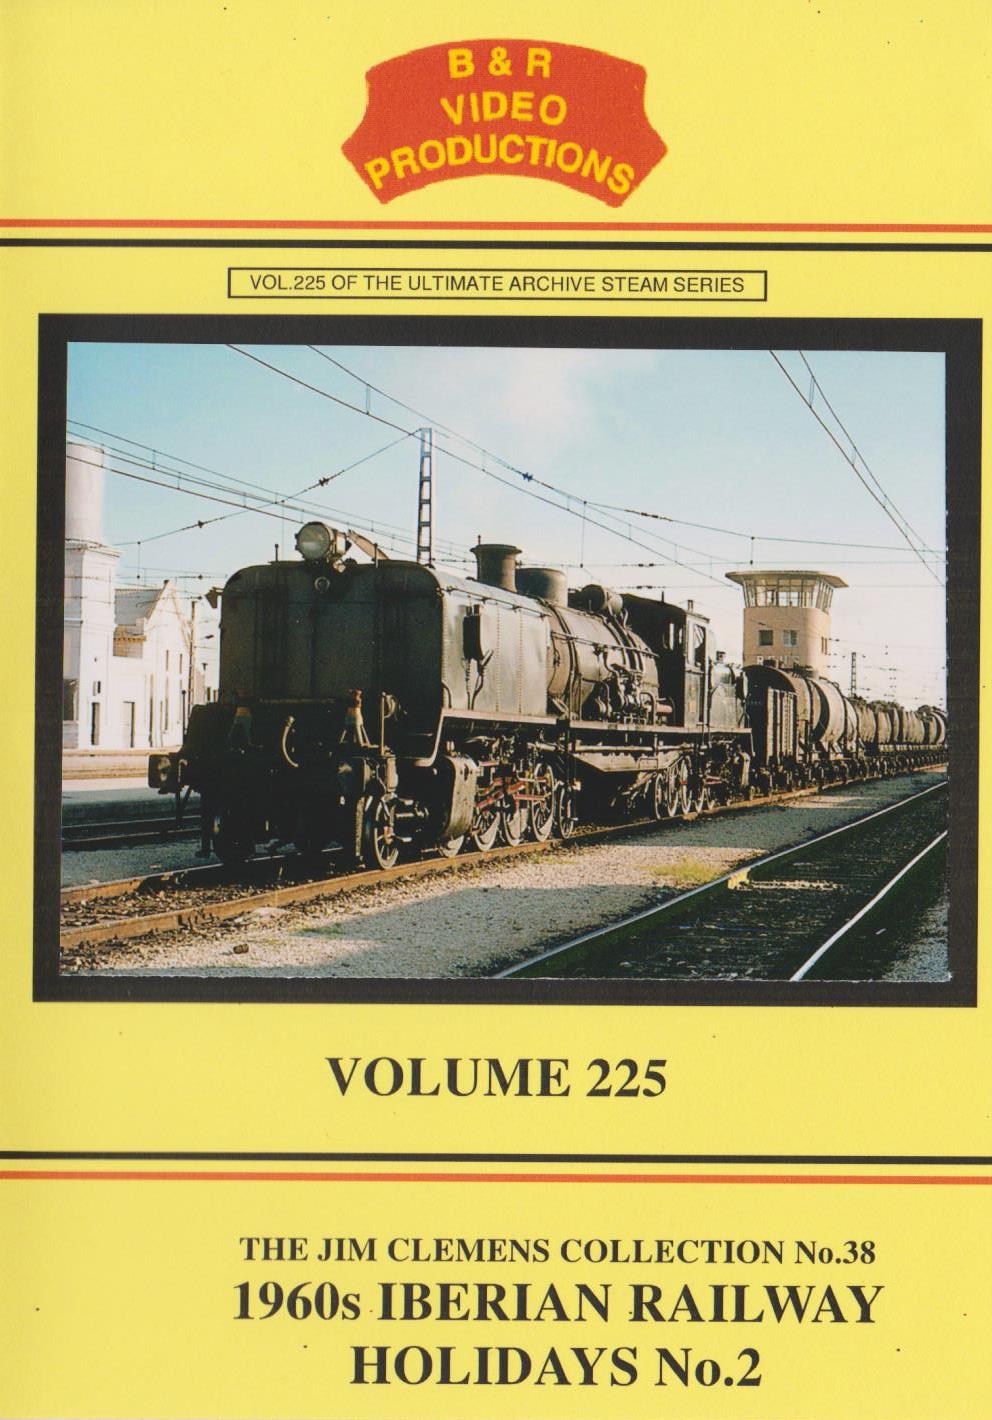 B & R Video Productions Vol 225 - The Jim Clemens collection No.38 1960s Iberian railway holidays No.2